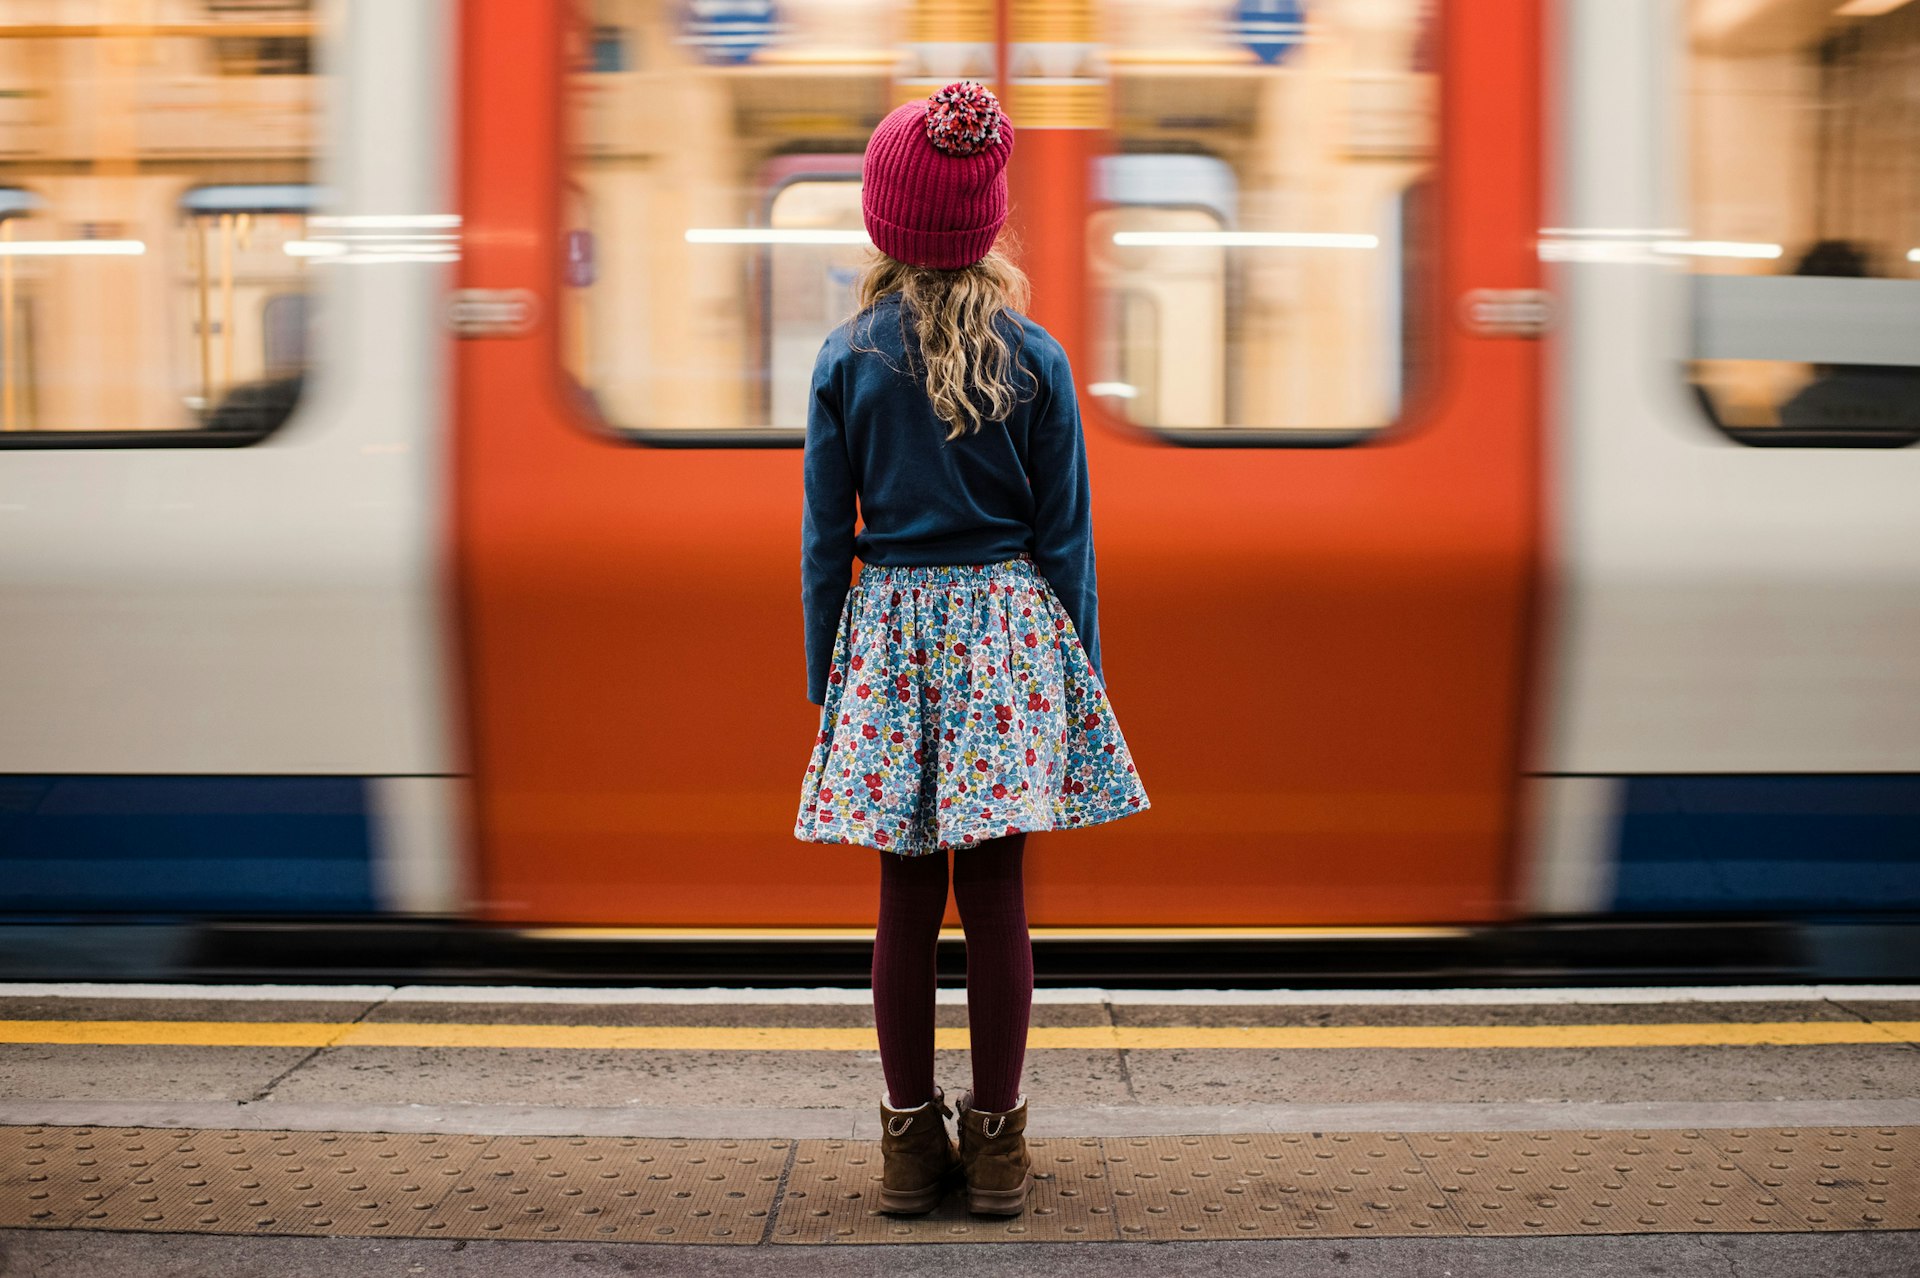 A girl stood waiting for a Tube on the platform in London